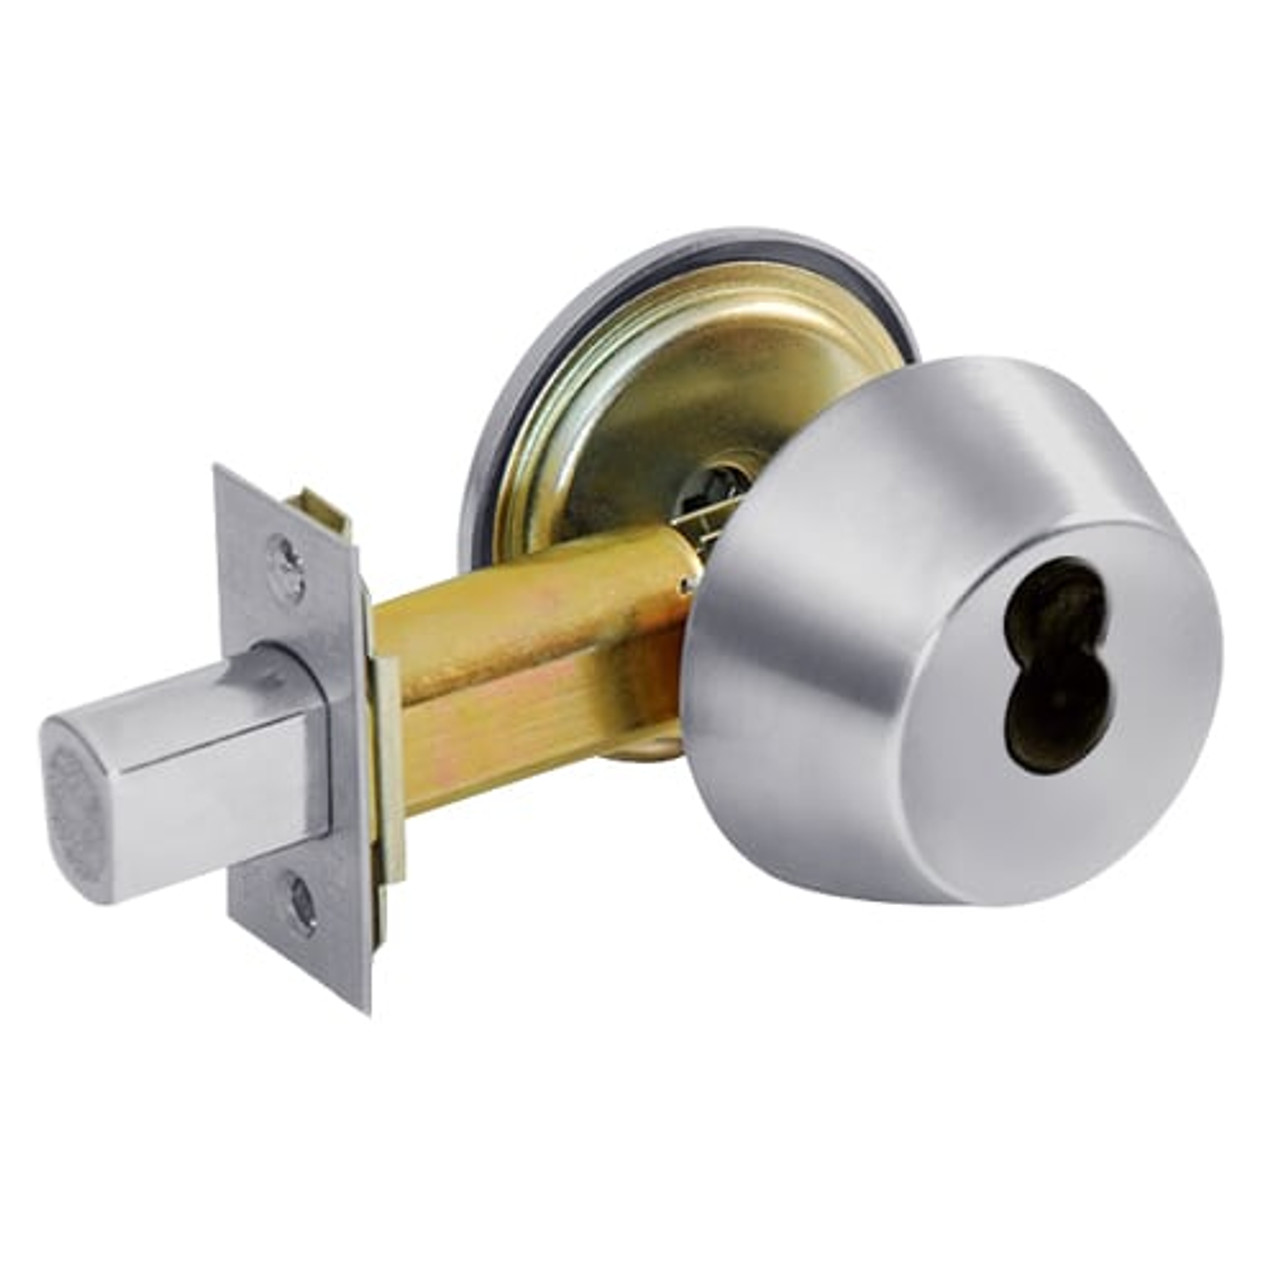 DL2213-626-CL6 Corbin DL2200 Series IC 6-Pin Less Core Cylindrical Deadlocks with Single Cylinder in Satin Chrome Finish